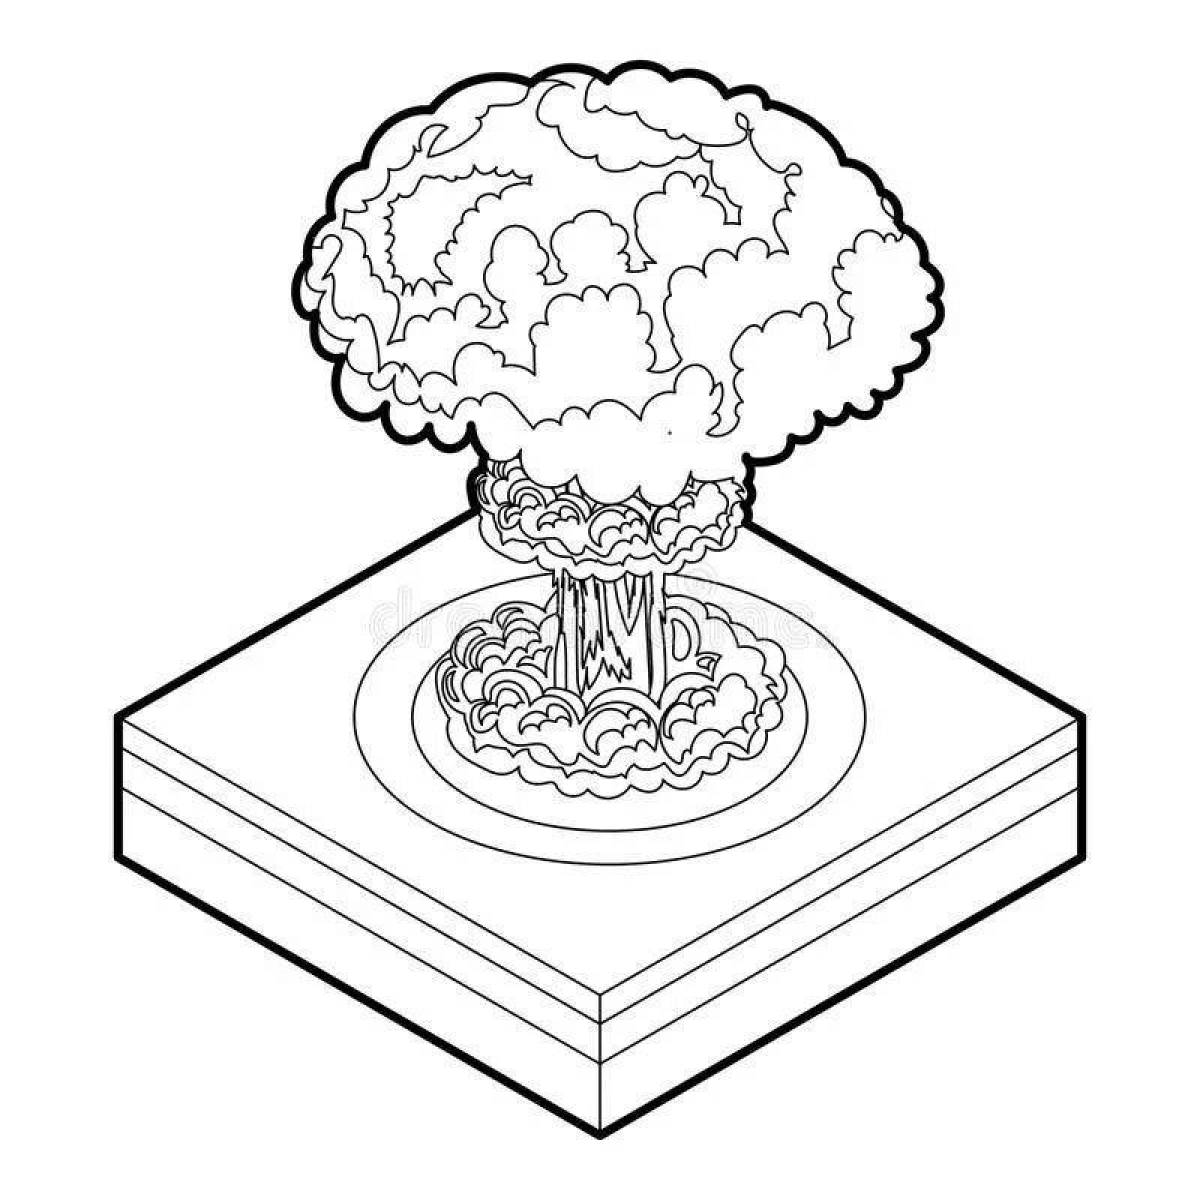 Coloring book charming nuclear bomb